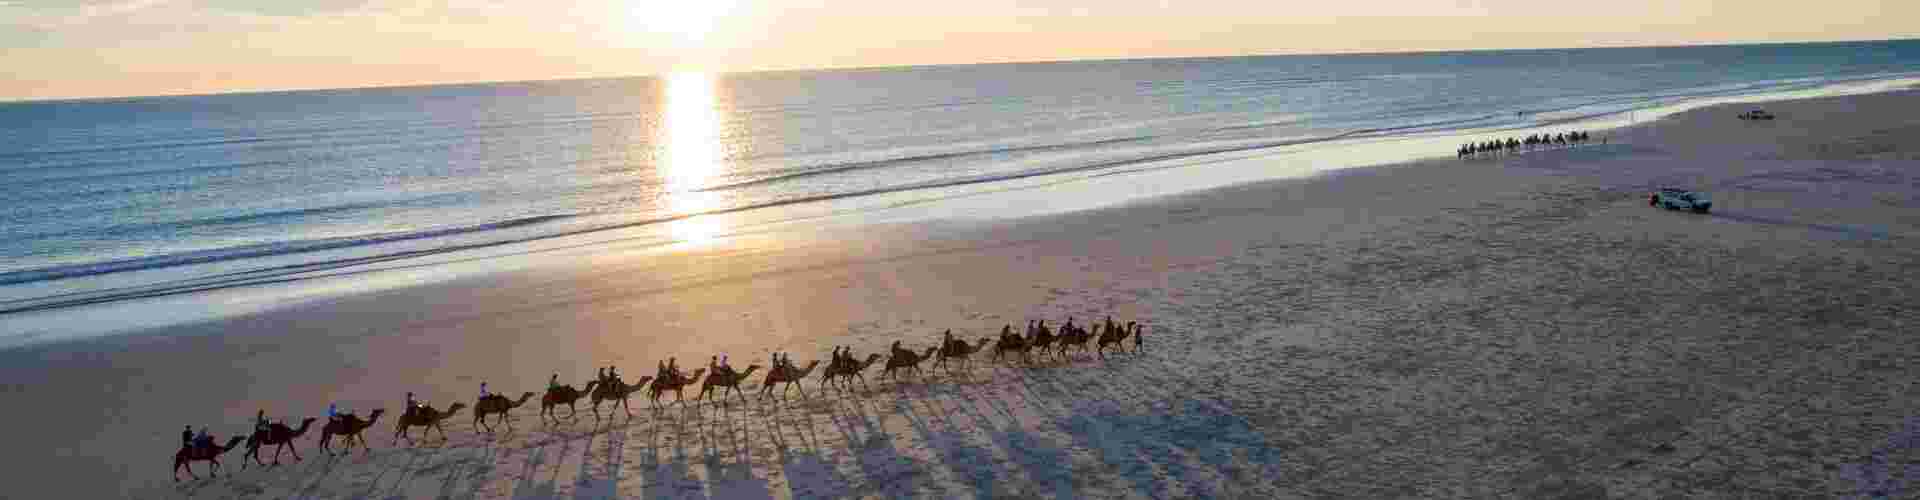 Camels walking in a line across the beach at sunset in Broome